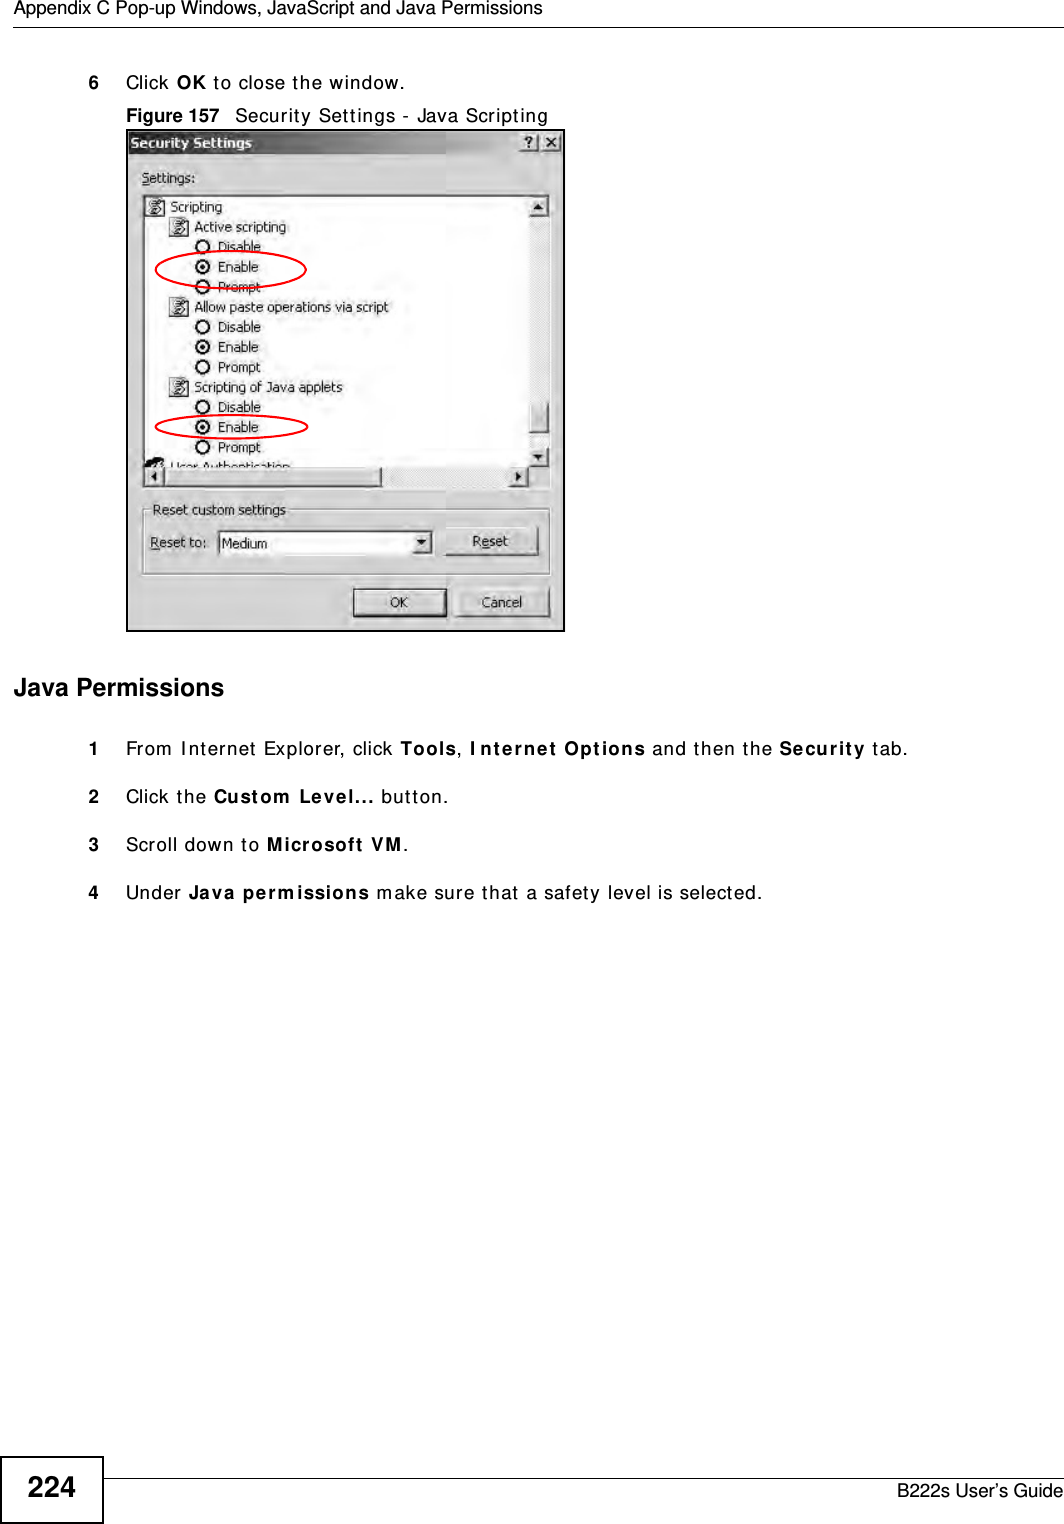 Appendix C Pop-up Windows, JavaScript and Java PermissionsB222s User’s Guide2246Click OK t o close t he window.Figure 157   Securit y Set t ings -  Java Script ingJava Permissions1From  I nt ernet Explorer, click Tools, I nt e r net  Opt ions and t hen t he Securit y tab. 2Click t he Cust om  Leve l... butt on. 3Scroll down t o M icrosoft  VM . 4Under Java perm ission s m ake sure that  a safet y  level is select ed.